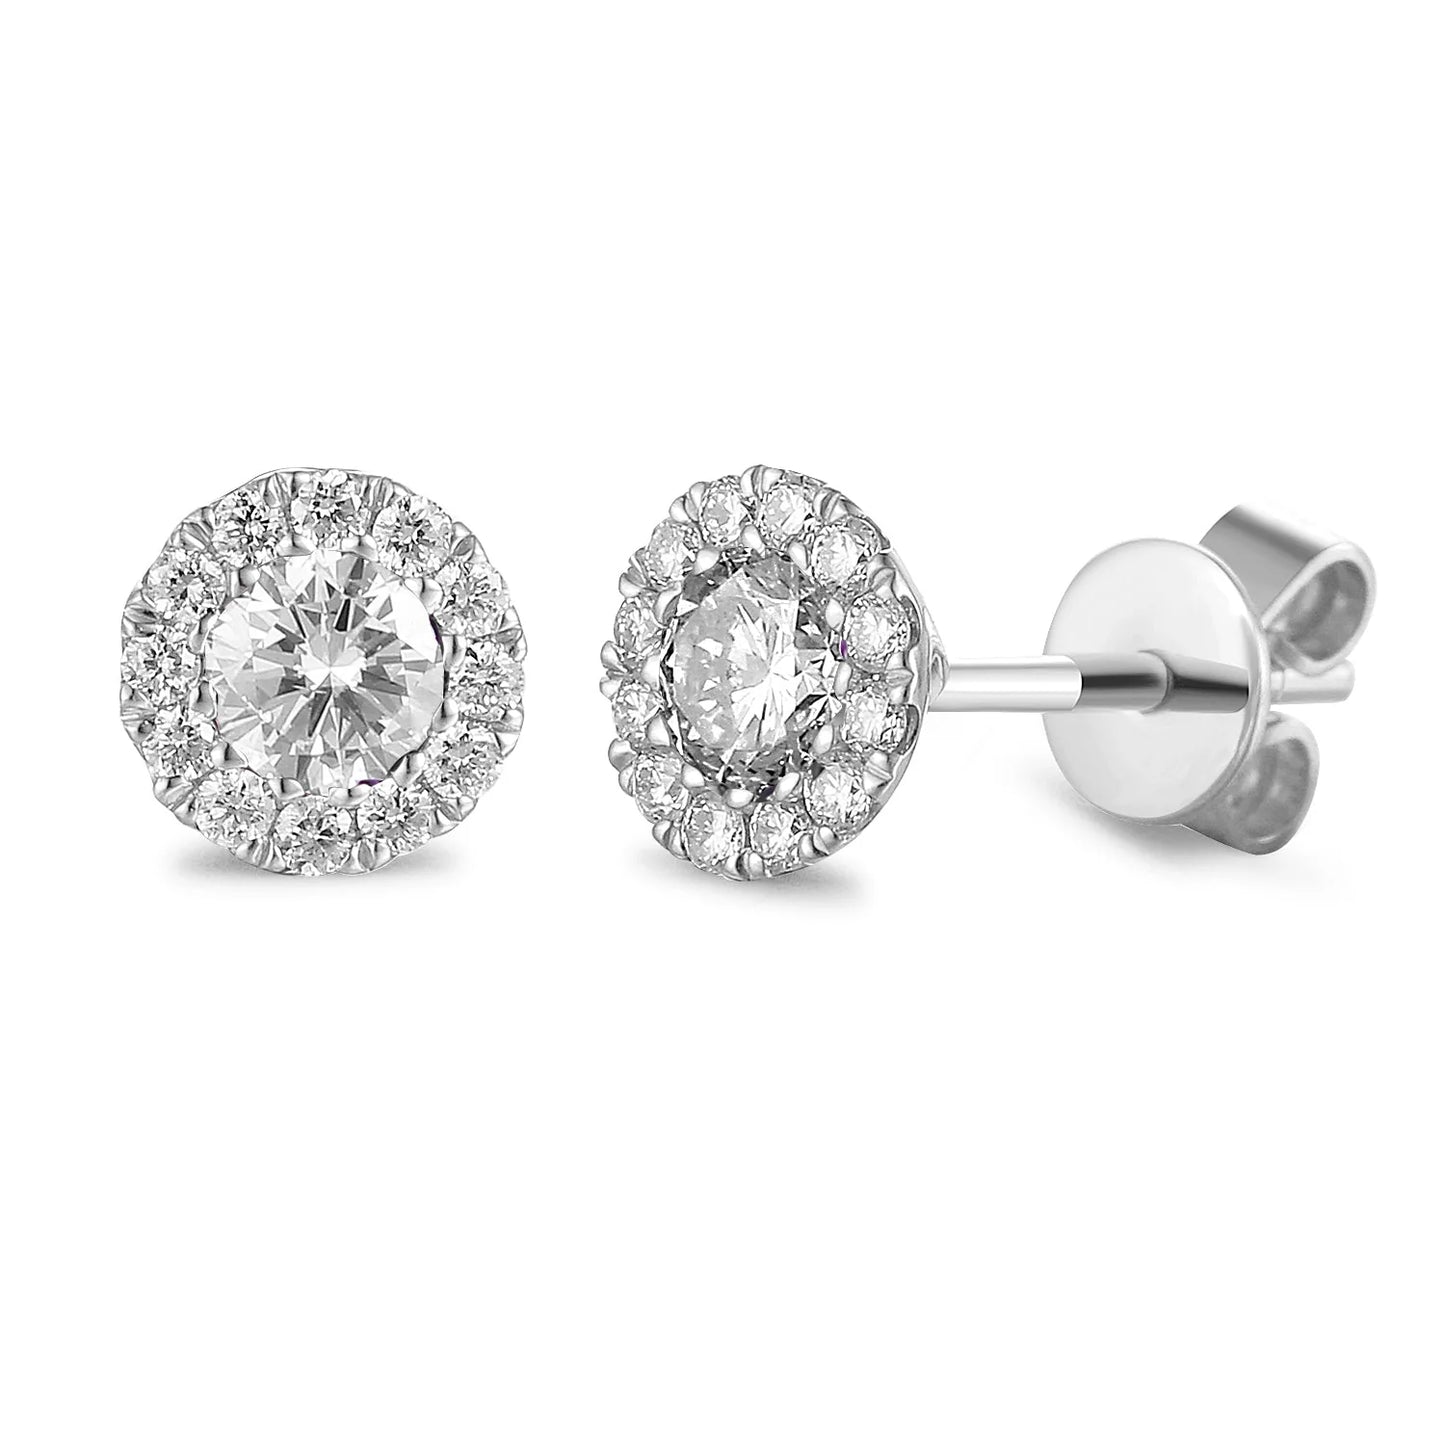 9ct White Gold Cluster Halo Diamond Stud Earrings, 0.46ct